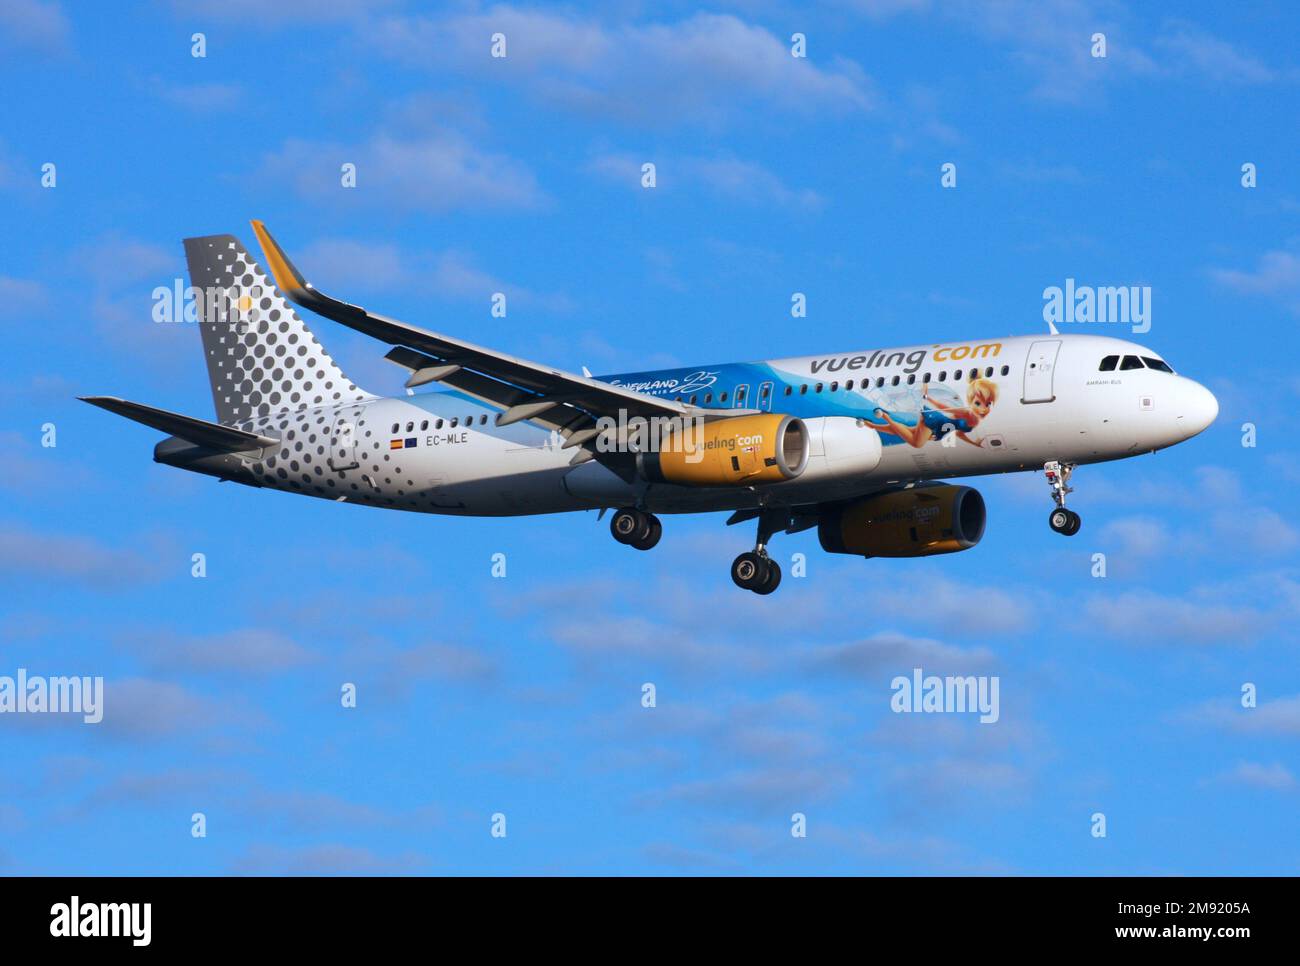 An Airbus A320 of Vueling with 25 Years of Disneyland Paris scheme lands at London Gatwick Airport Stock Photo